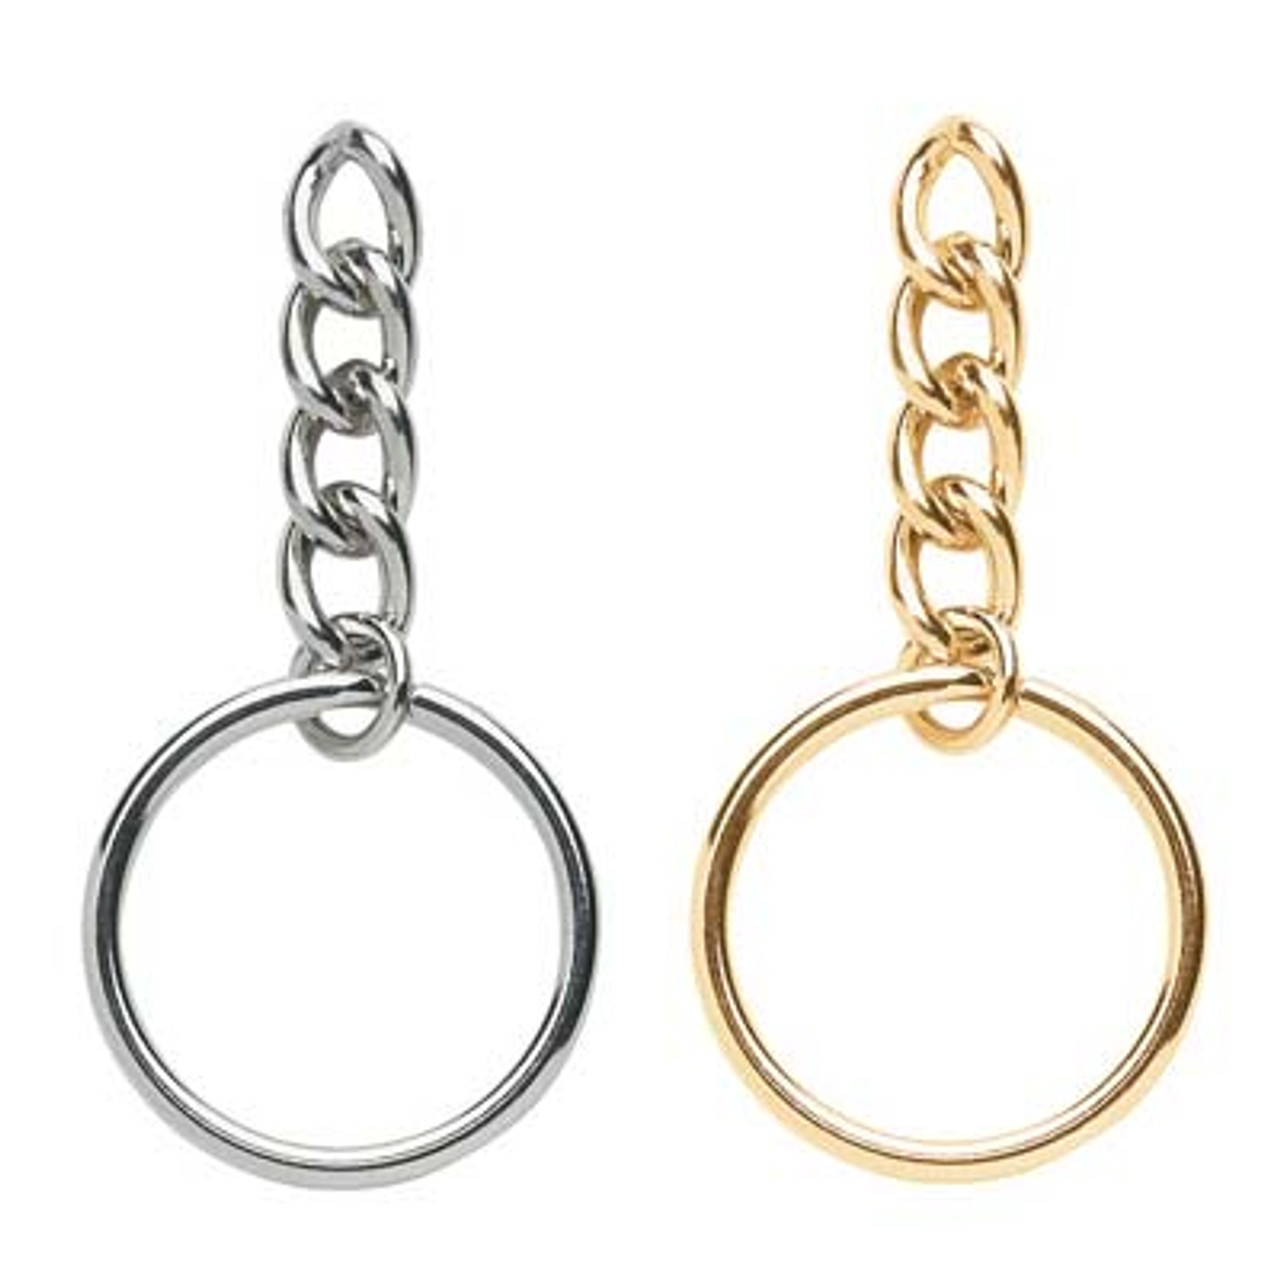 Split Key Ring and Chain